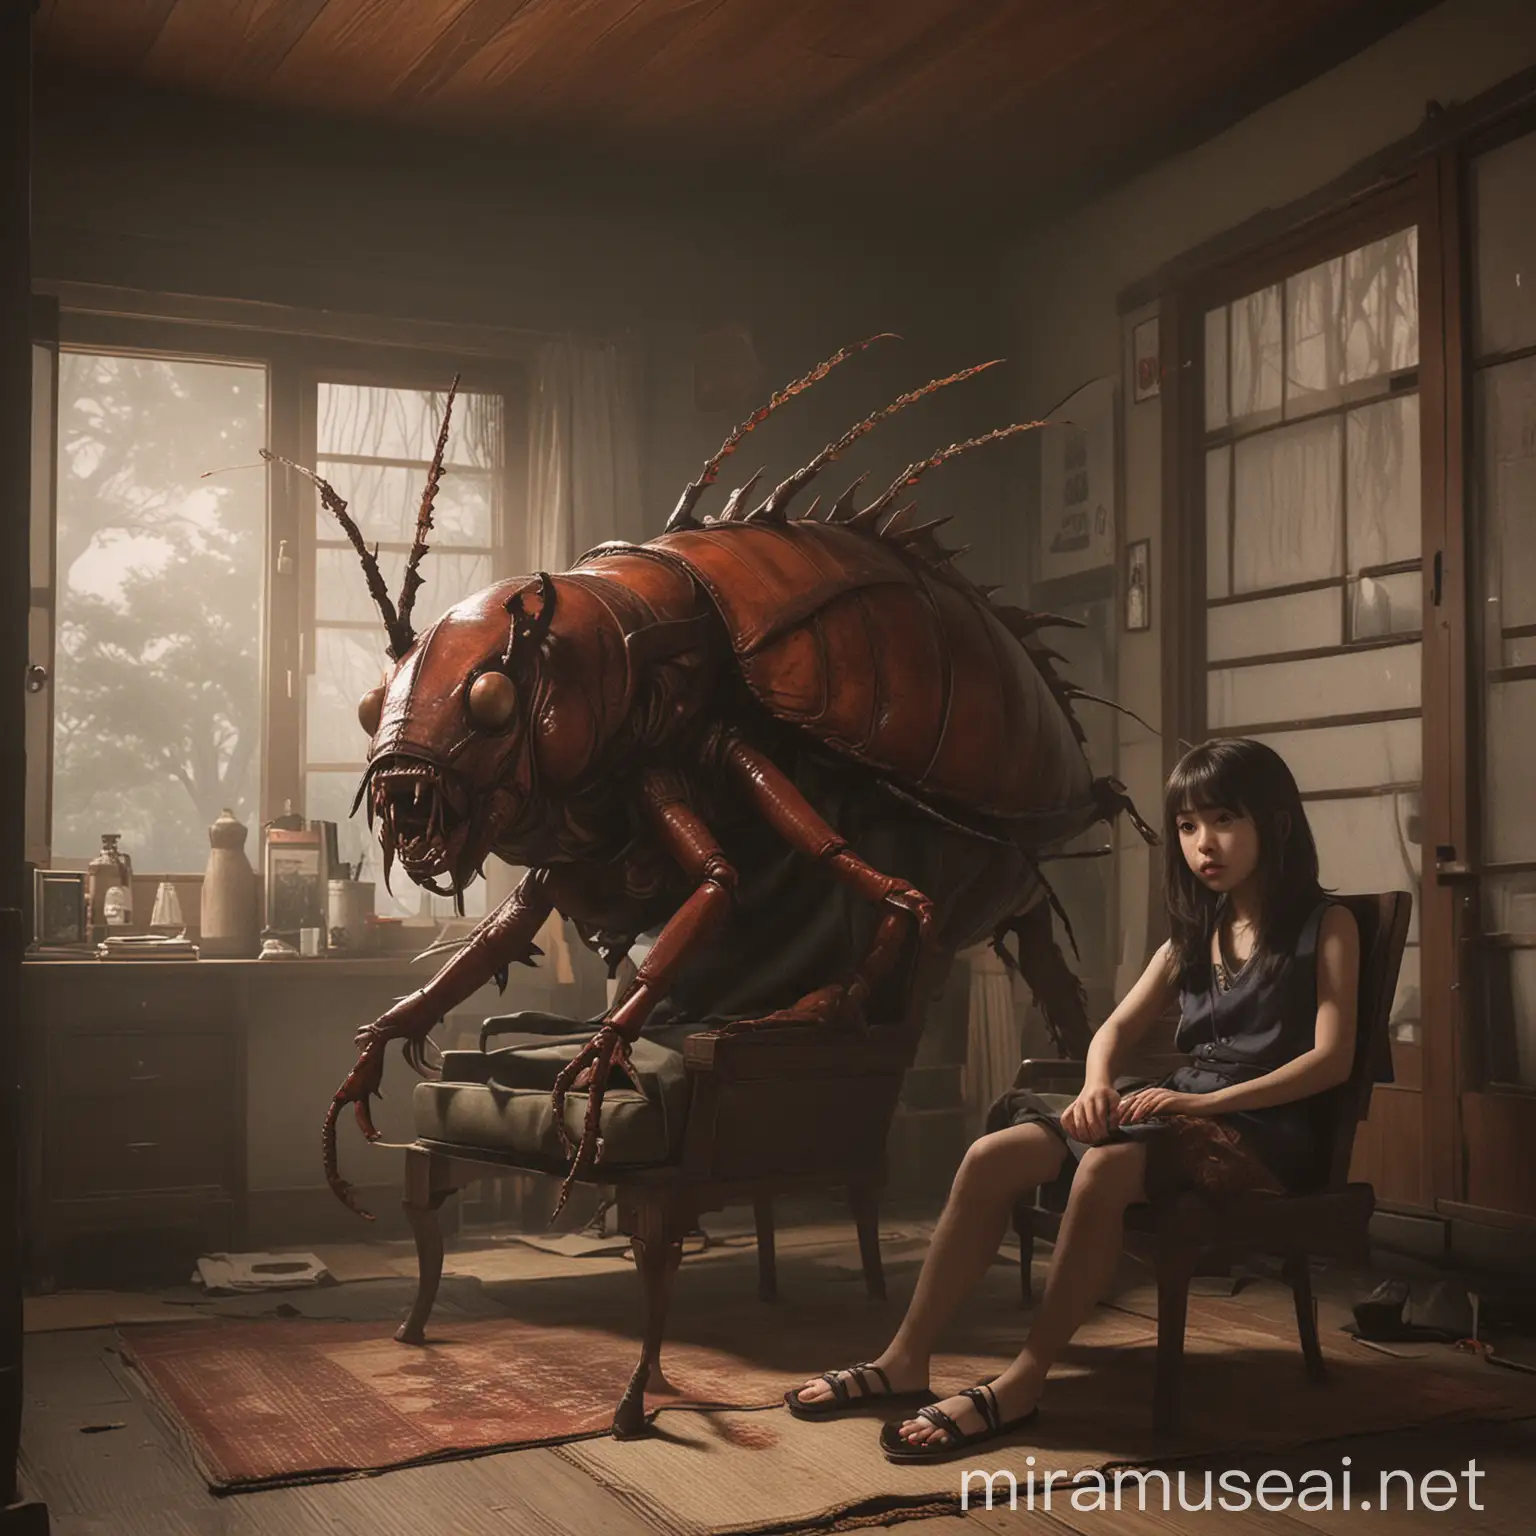 Japanese Girl Confronts Giant Alien Cockroach in Haunted House